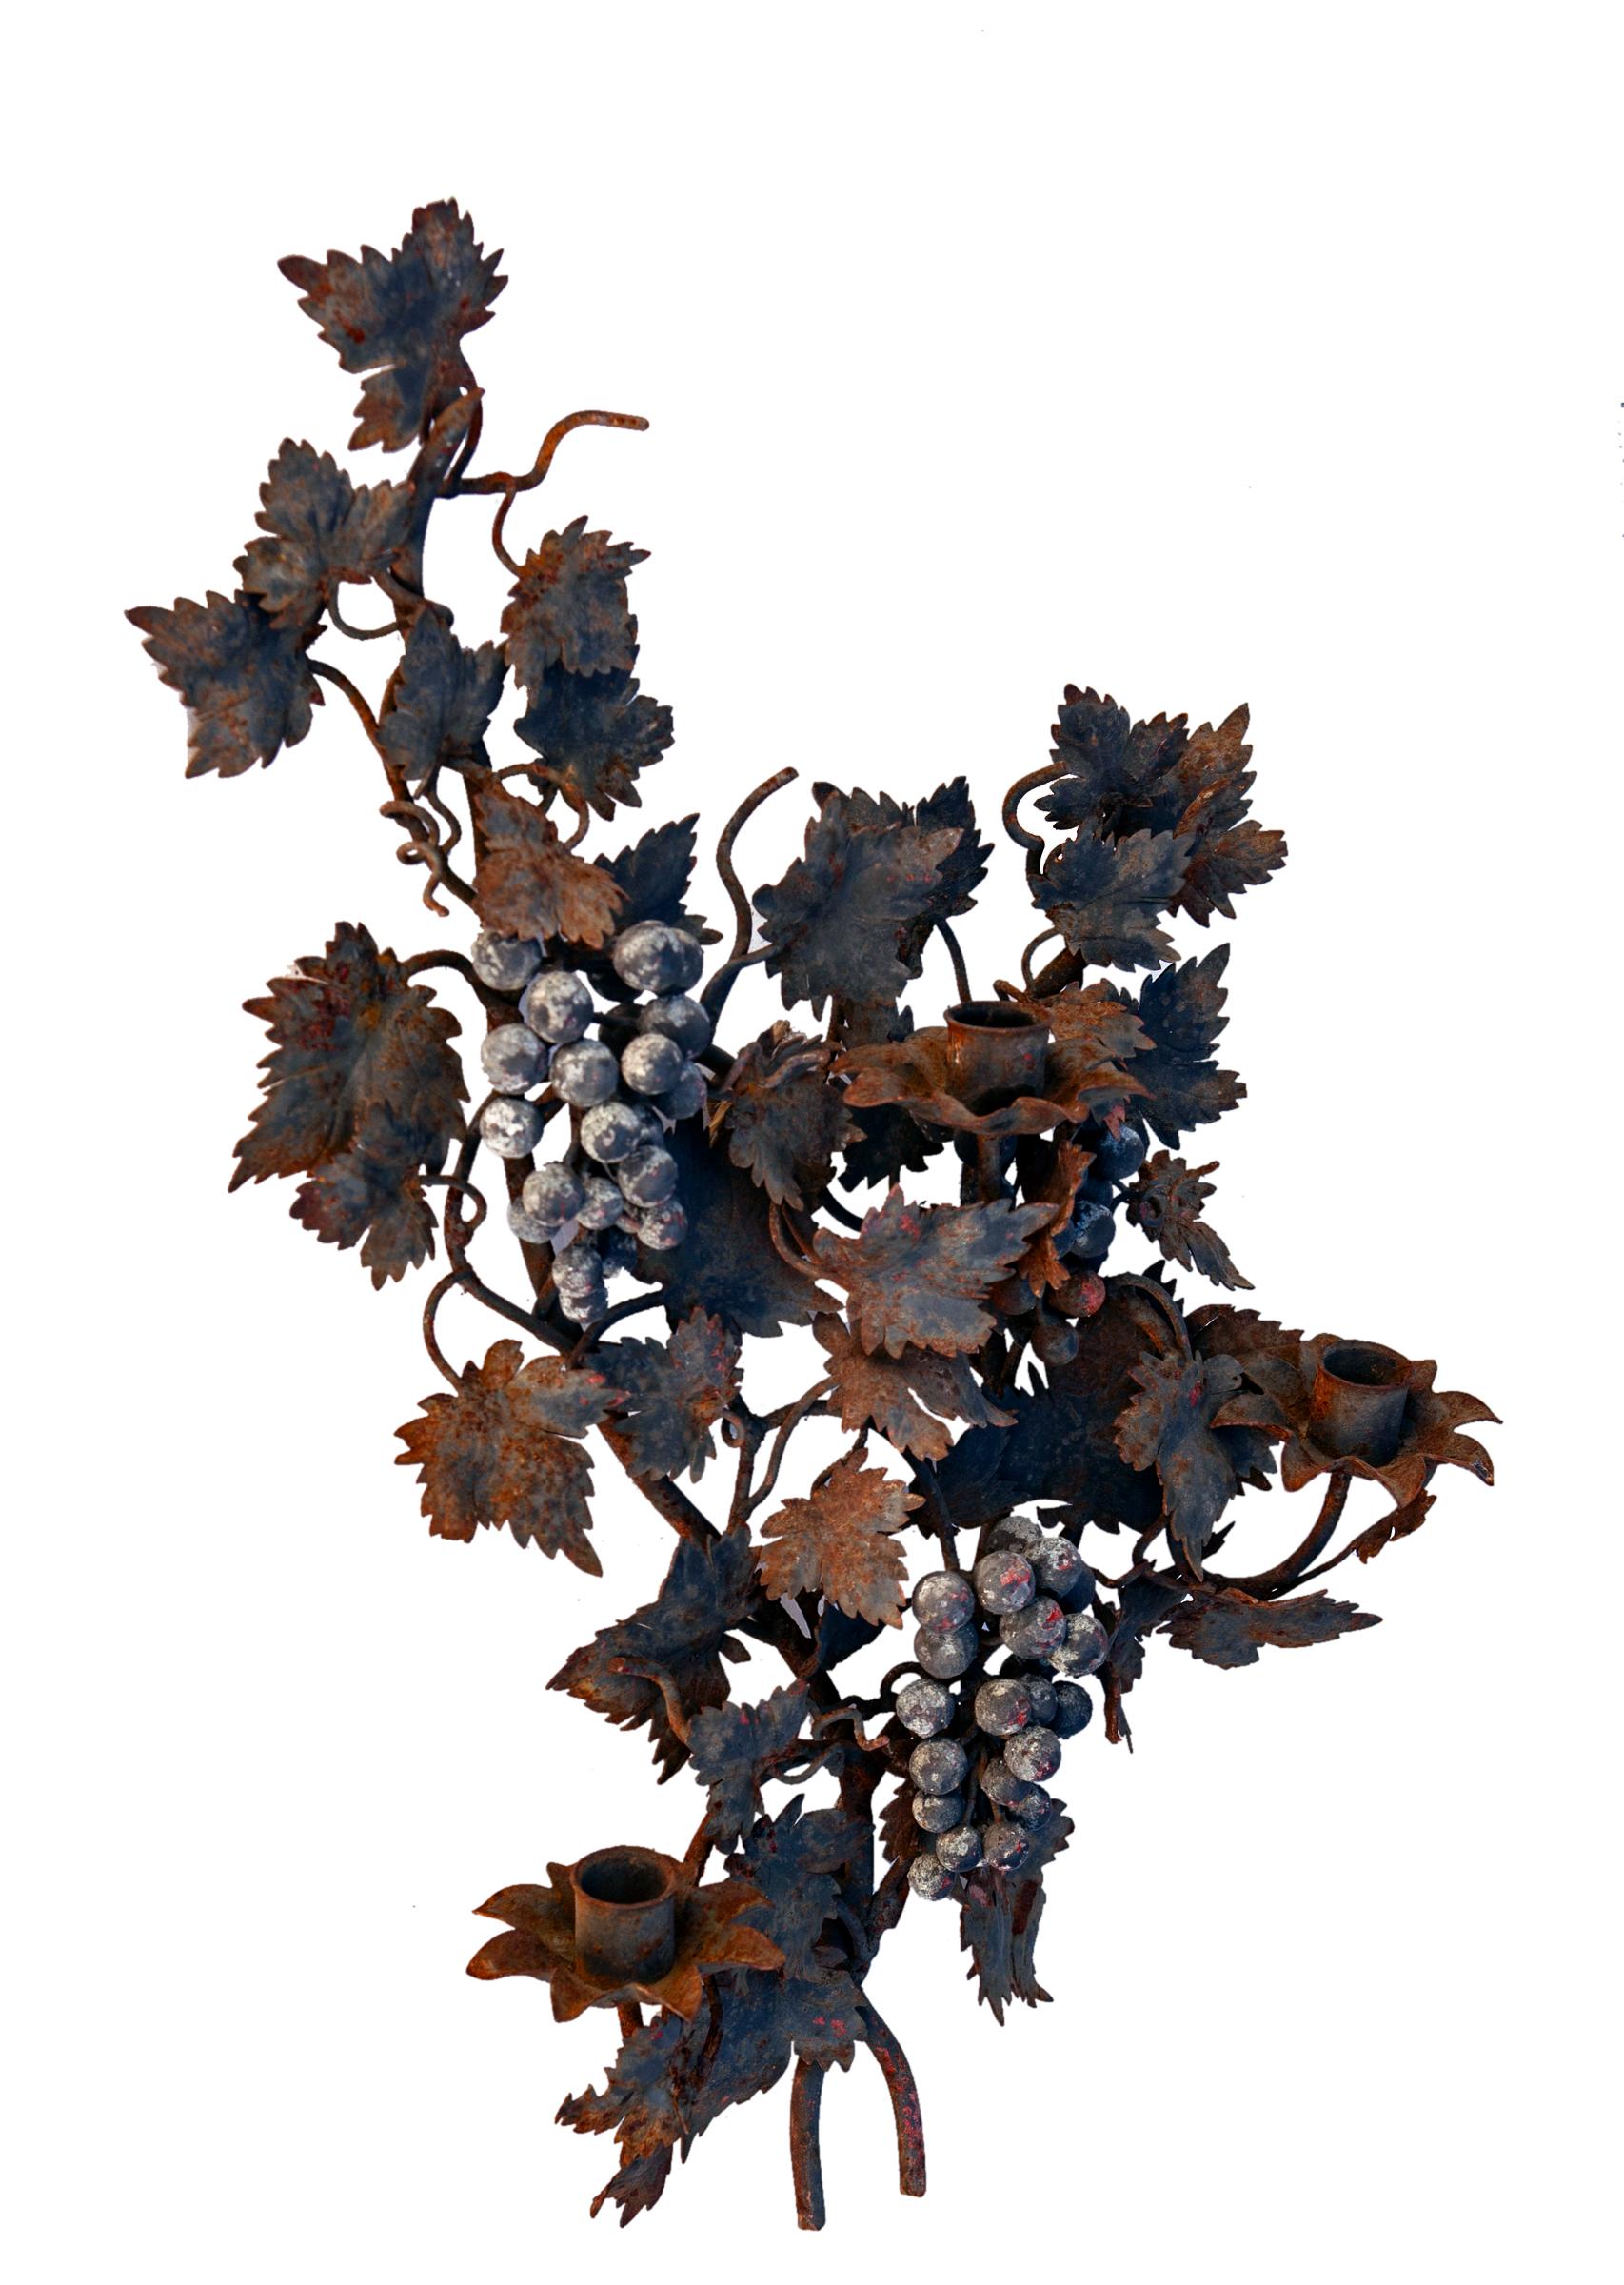 Rustic Rusty Iron Candle Wall Sconce Grape Vine Motif For Sale